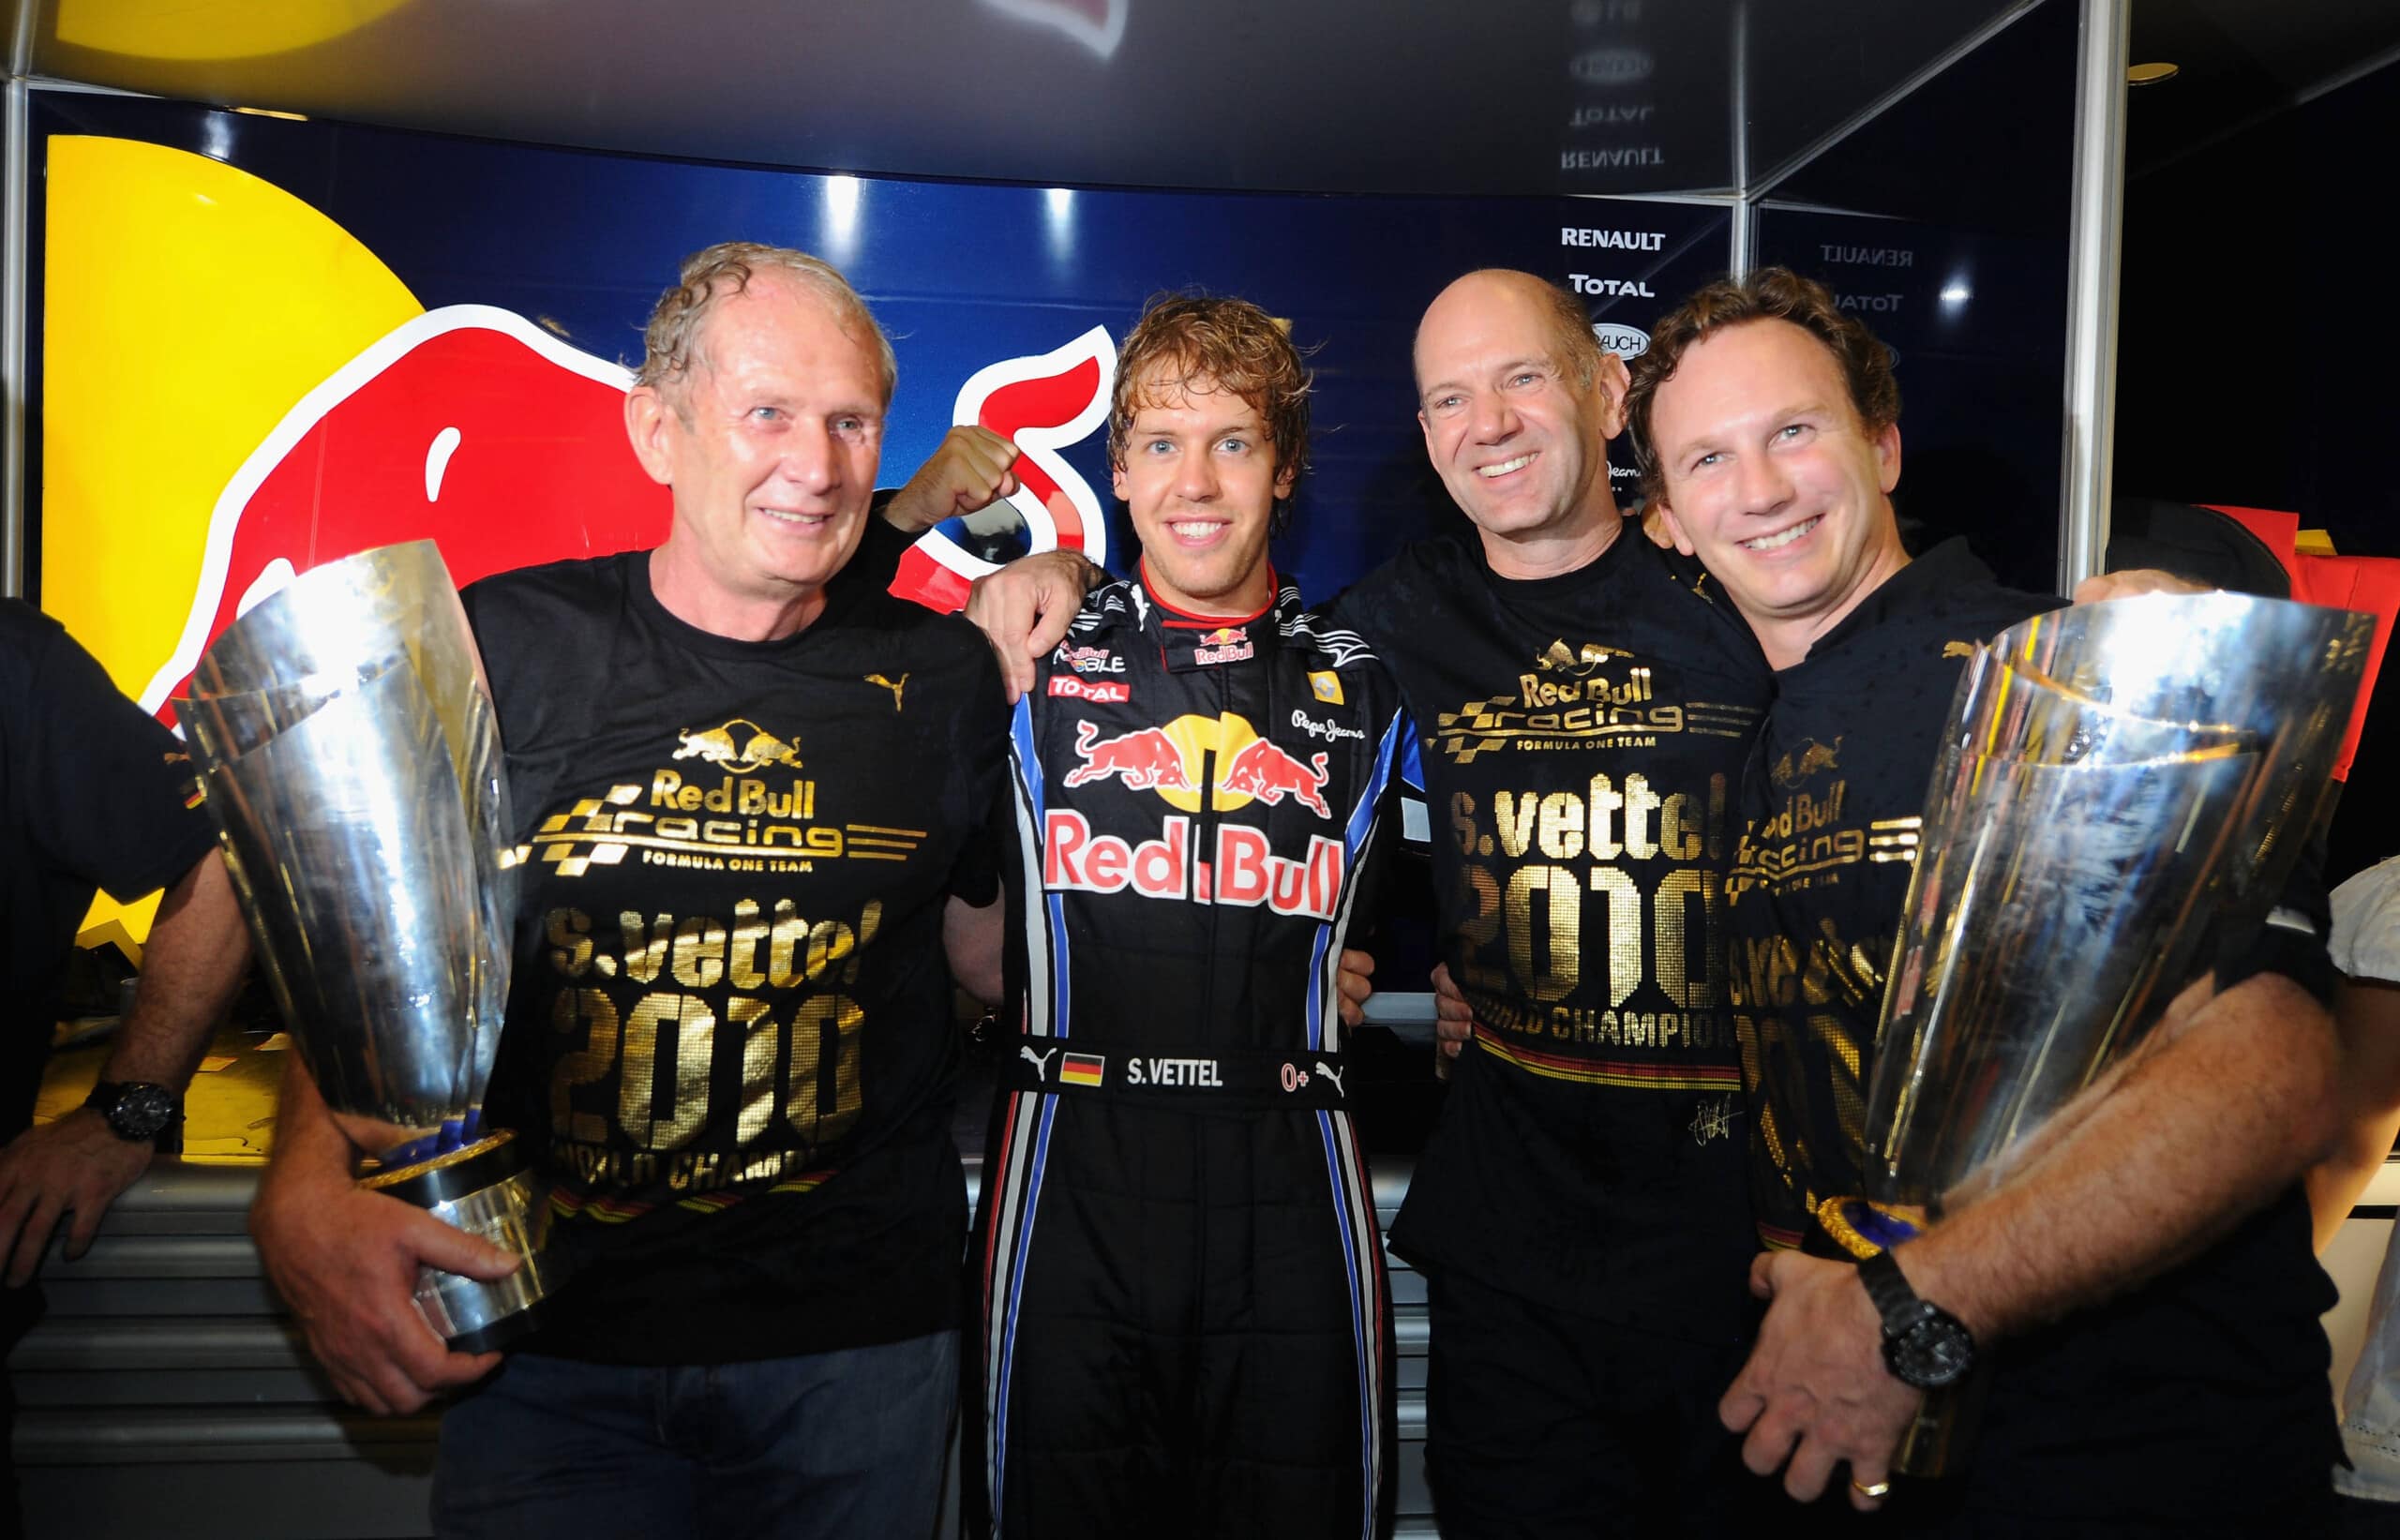 ABU DHABI, UNITED ARAB EMIRATES - NOVEMBER 14: Race winner and F1 2010 World Champion Sebastian Vettel (2nd left) of Germany and Red Bull Racing celebrates with Red Bull Racing Motorsport Consultant Dr Helmut Marko (left), Red Bull Racing Chief Technical Officer Adrian Newey (2nd right) and Red Bull Racing Team Principal Christian Horner (right) in their team garage following the Abu Dhabi Formula One Grand Prix at the Yas Marina Circuit on November 14, 2010 in Abu Dhabi, United Arab Emirates. (Photo by Clive Mason/Getty Images) *** Local Caption *** Sebastian Vettel; Christian Horner; Adrian Newey; Helmut Marko // Getty Images / Red Bull Content Pool // SI201412040507 // Usage for editorial use only //